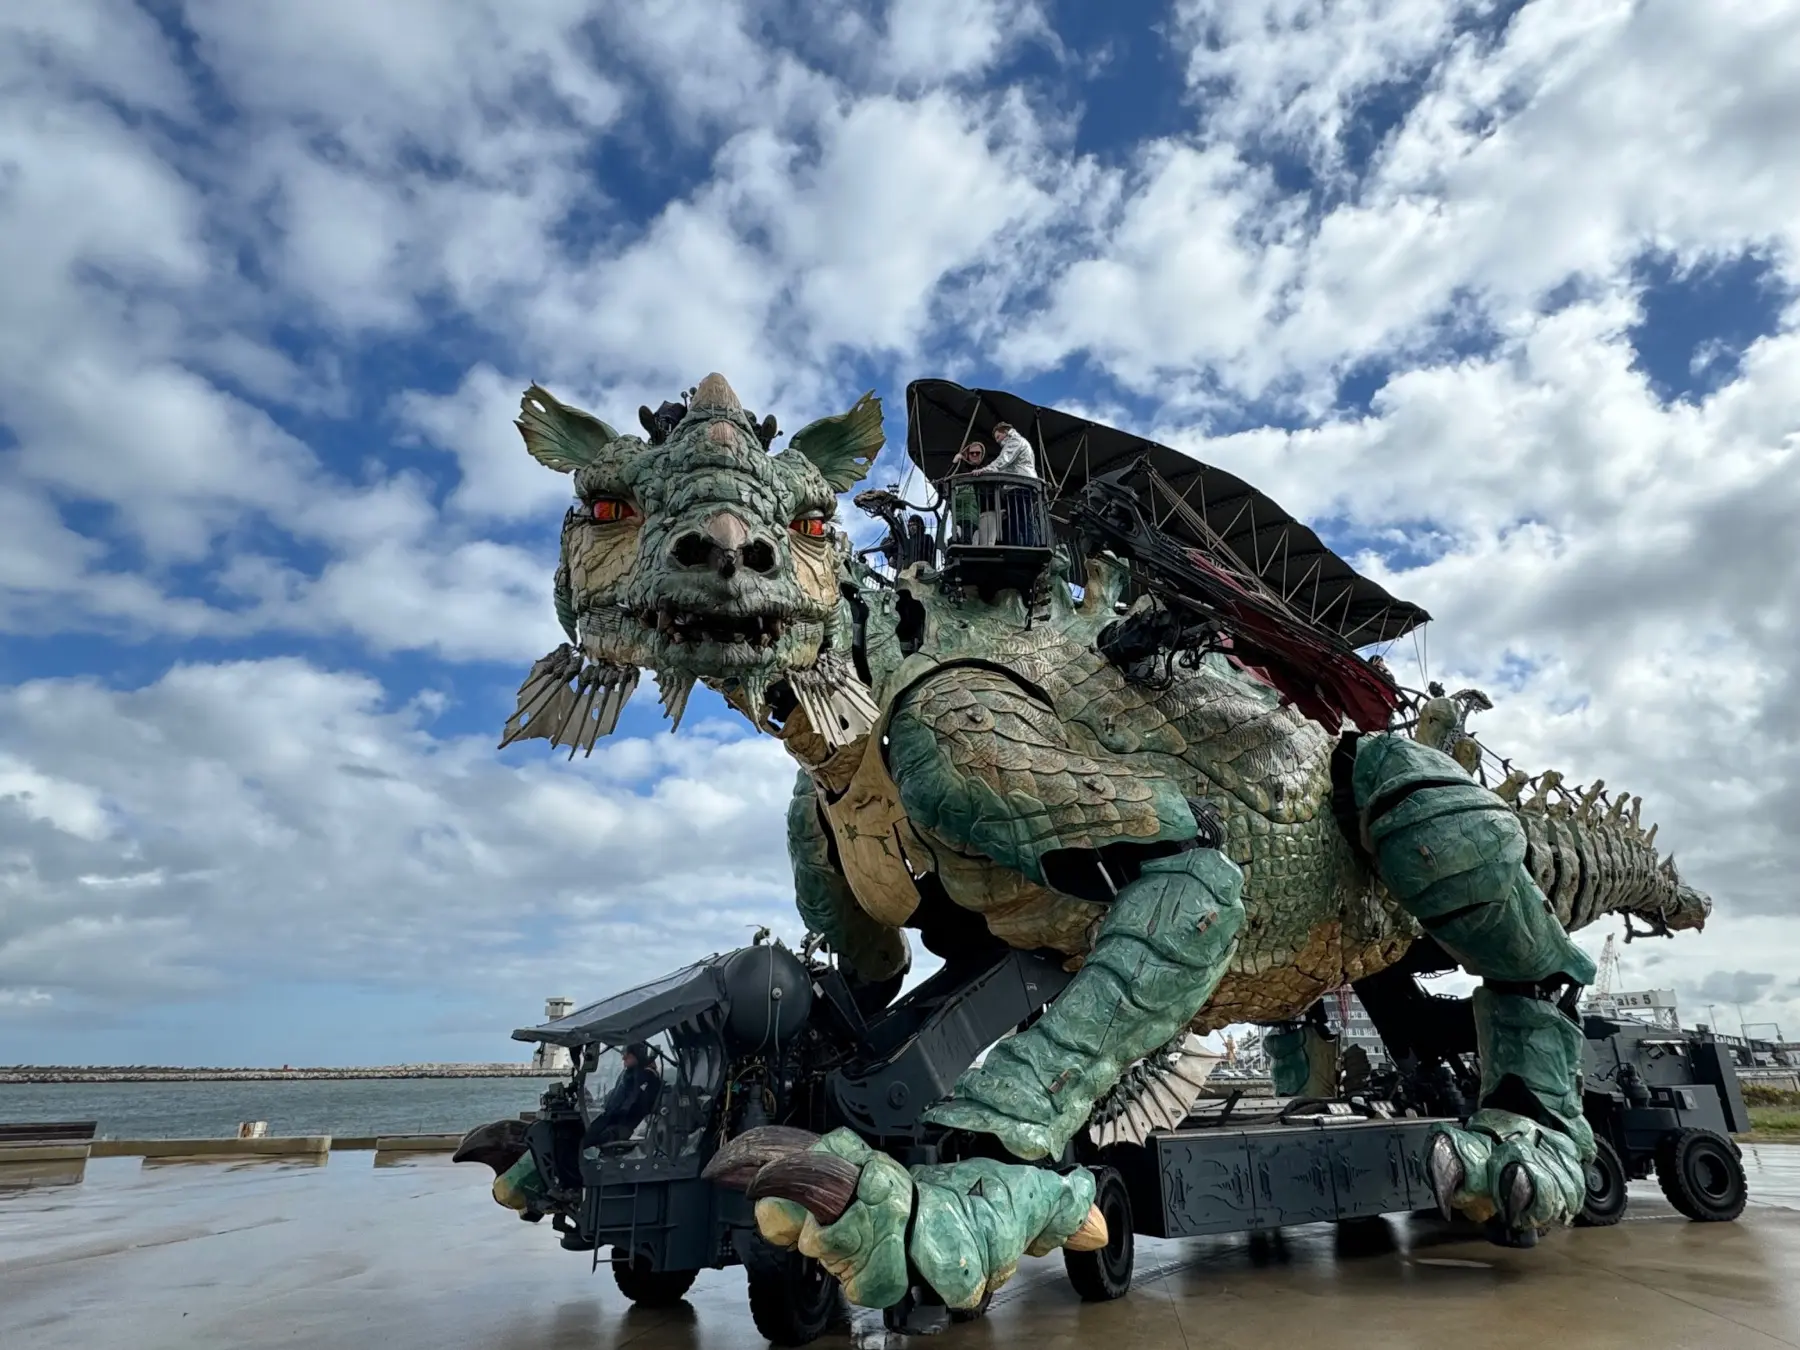 One Car and a Dragon on a Pas-de-Calais Holiday - Travel Begins at 40